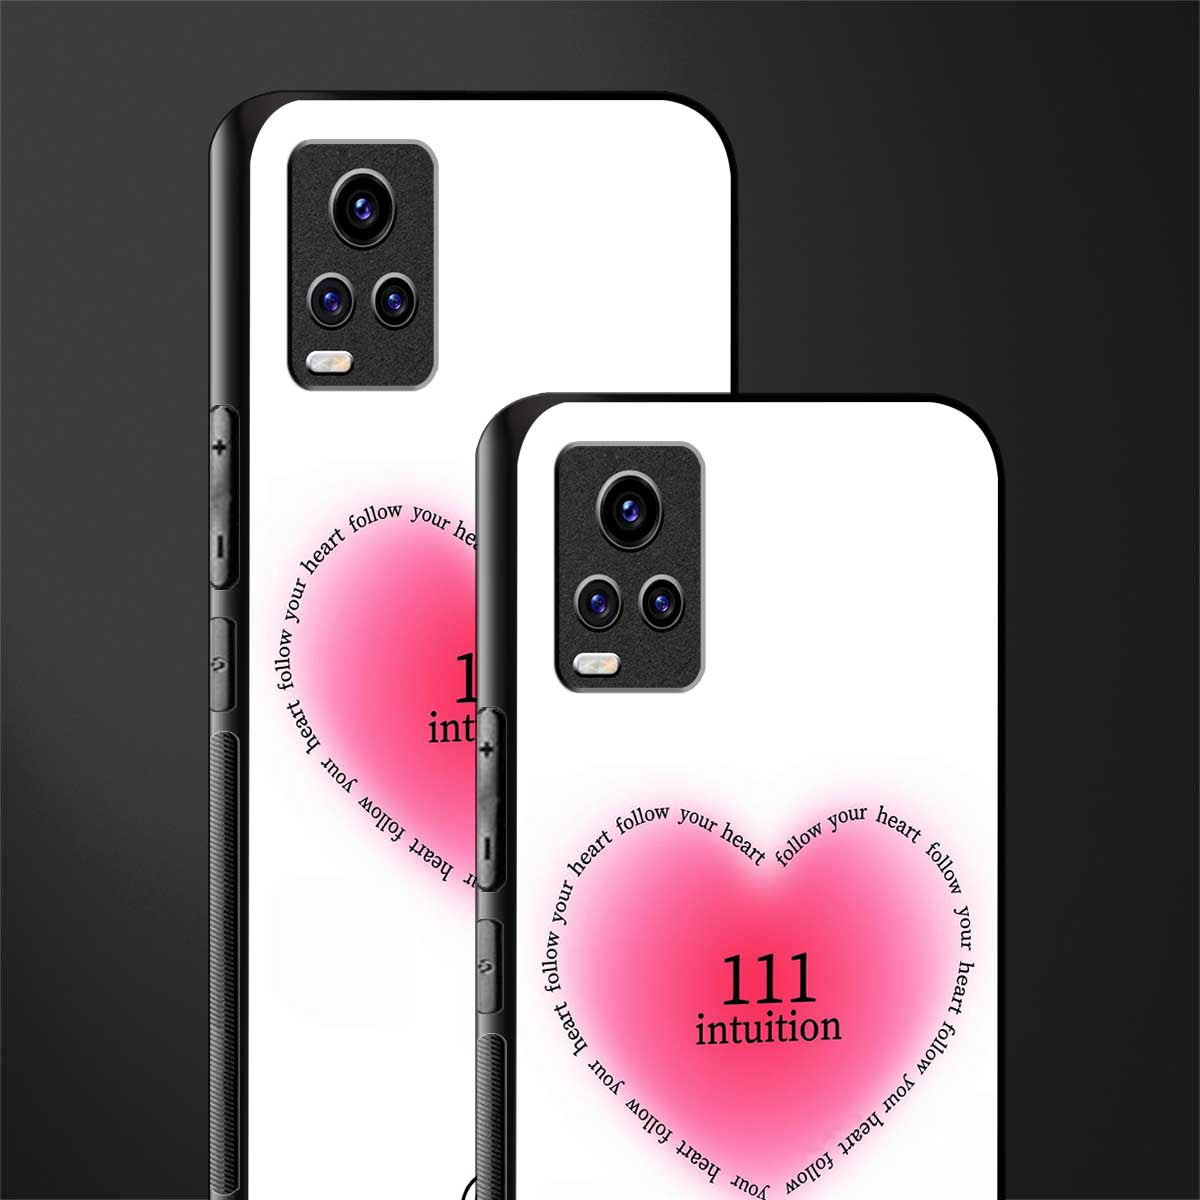 111 intuition back phone cover | glass case for vivo y73